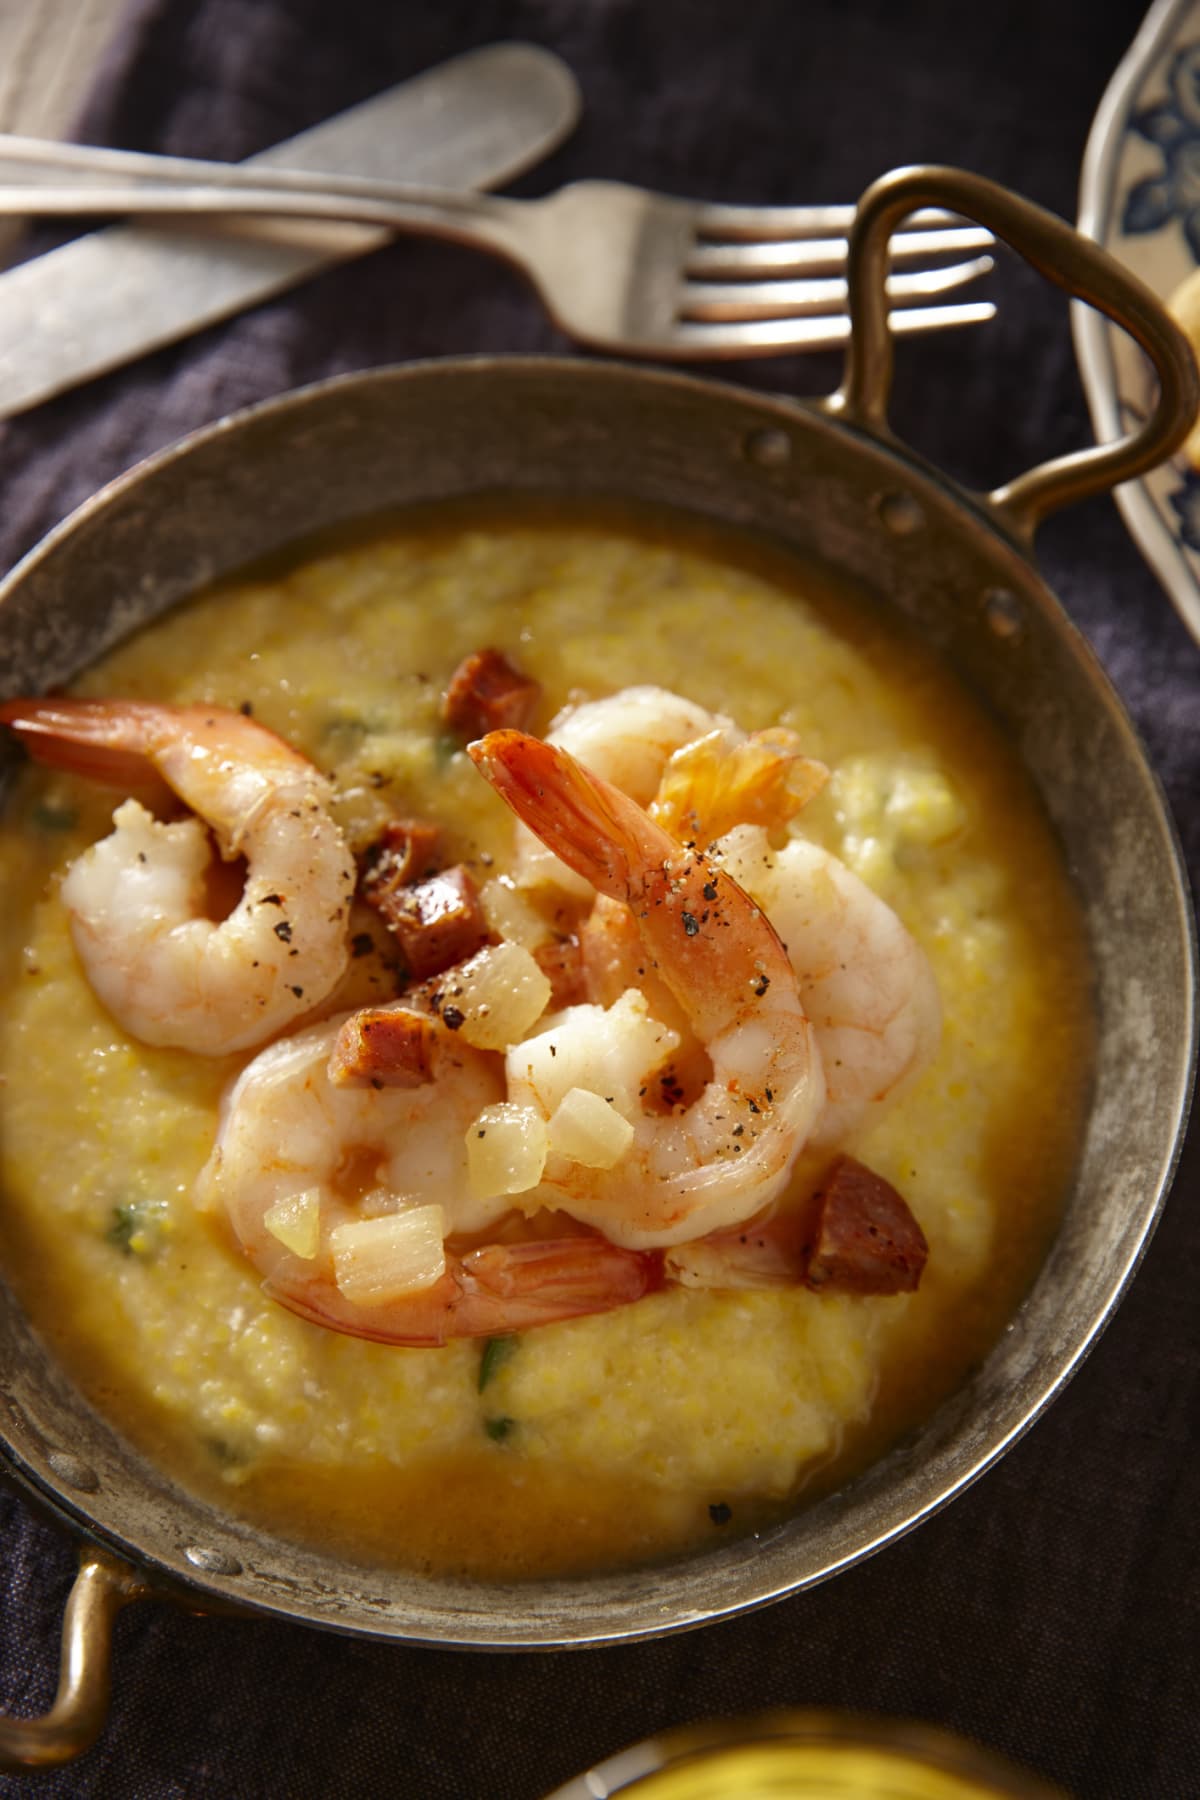 "Creamy Grits with Shrimp, Bacon and Fresh Parsley - Photographed on Hasselblad H3D2-39mb Camera"